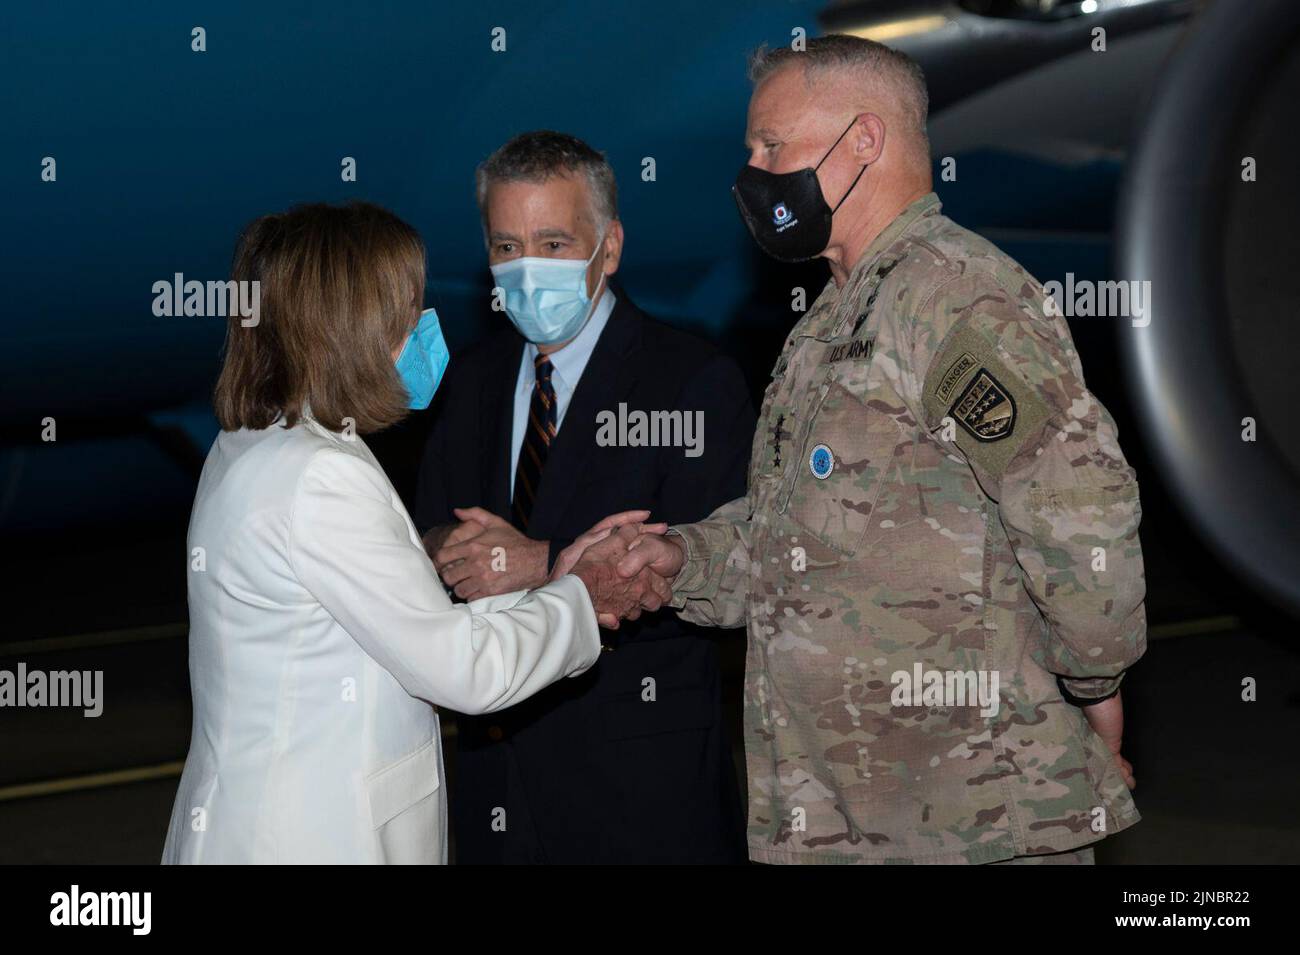 Nancy Pelosi, speaker of the U.S. House of Representatives, shakes hands with U.S. Army Gen.  Paul LaCamera, United States Forces Korea commander, at Osan Air Base, Republic of Korea, Aug 3, 2022. Pelosi and a Congressional delegation visited the Republic of Korea as part of her Indo-Pacific tour where they focused on mutual security, economic partnerships and democratic governance in the region. (U.S. Air Force photo by Senior Airman Trevor Gordnier) Stock Photo